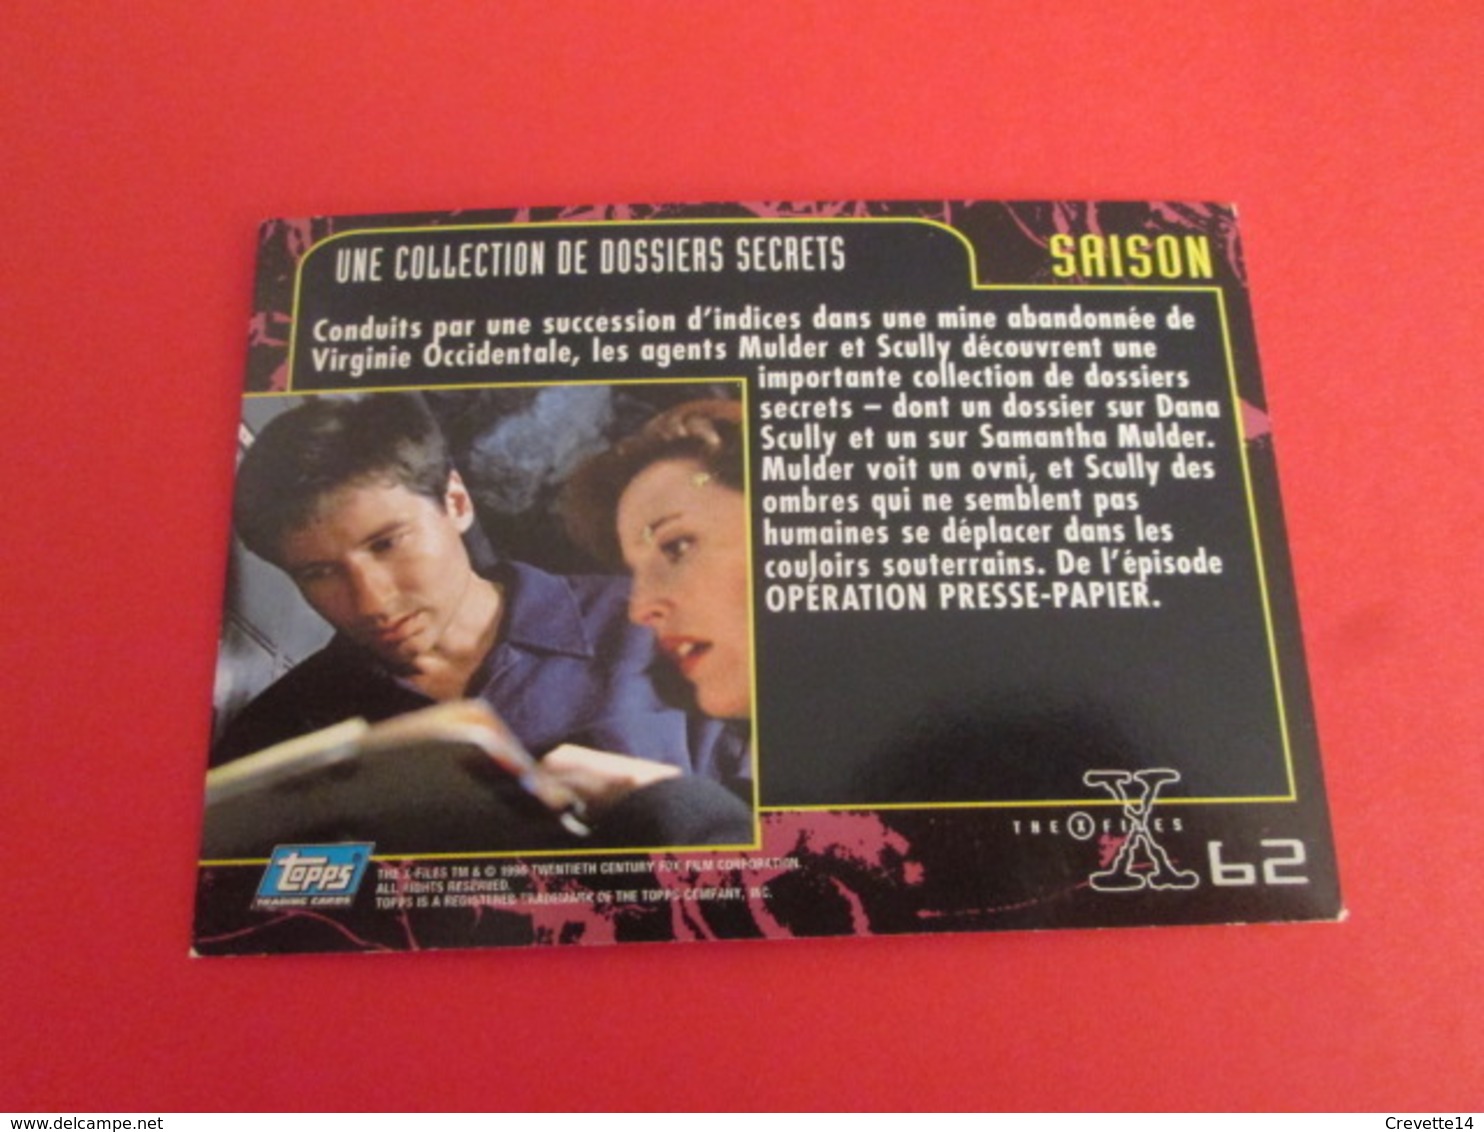 1-25  TRADING CARD TOPPS SERIE TELE X-FILES MULDER SCULLY : N°62 SAISON UNE COLLECTION DE SECRETS - X-Files